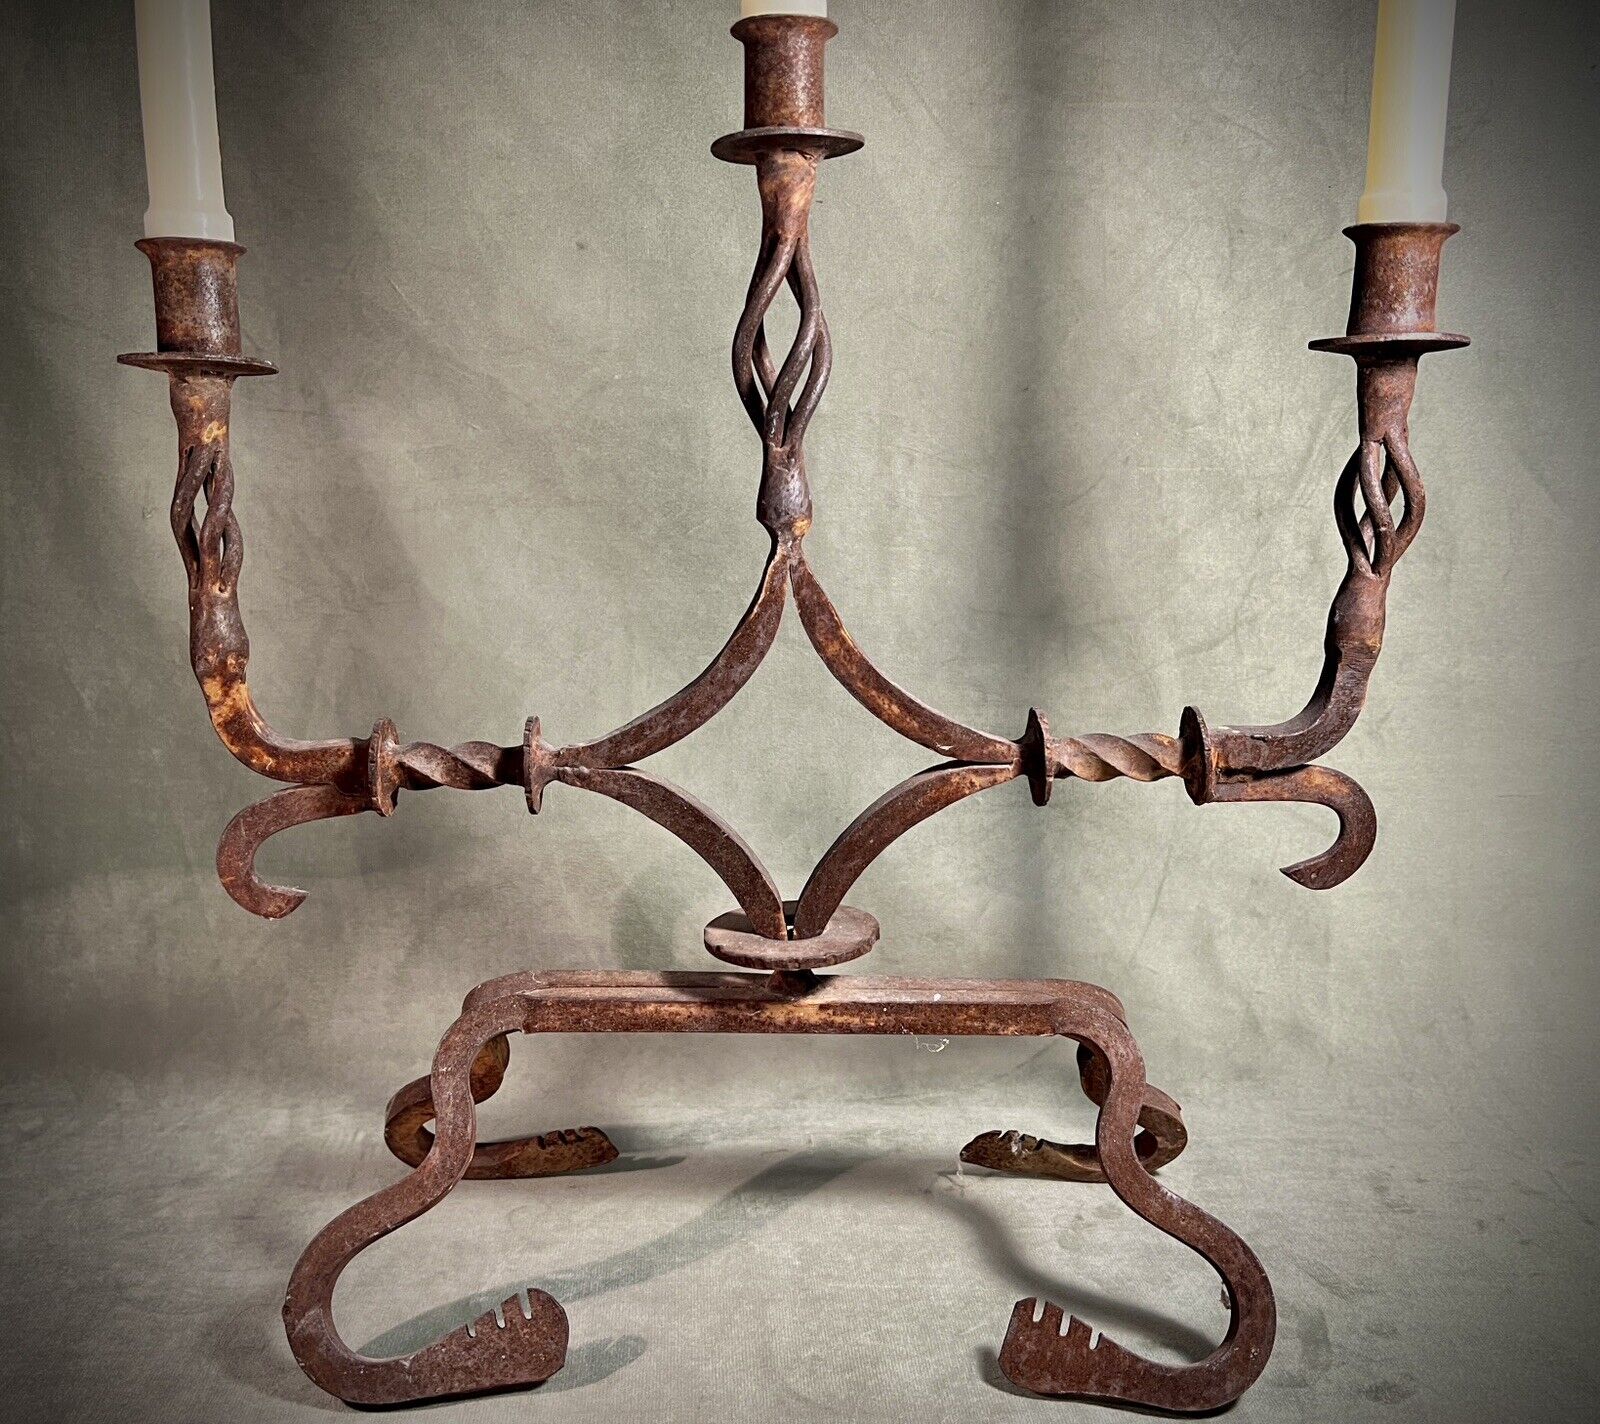 RARE FIND Amazing VINTAGE HAND MADE WROUGHT IRON CANDELABRA CANDLE HOLDER